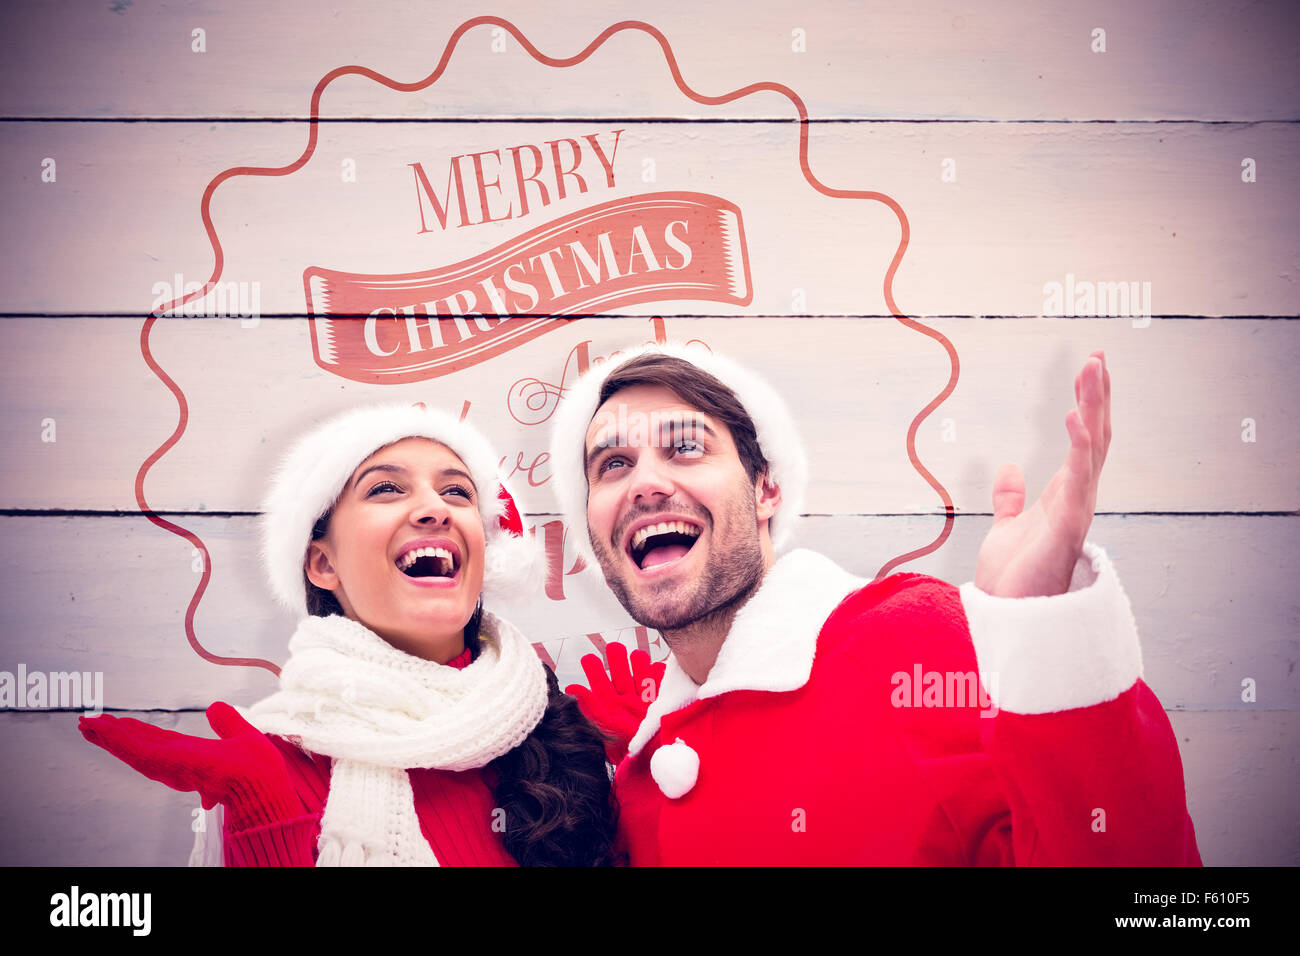 Composite image of festive young couple Stock Photo